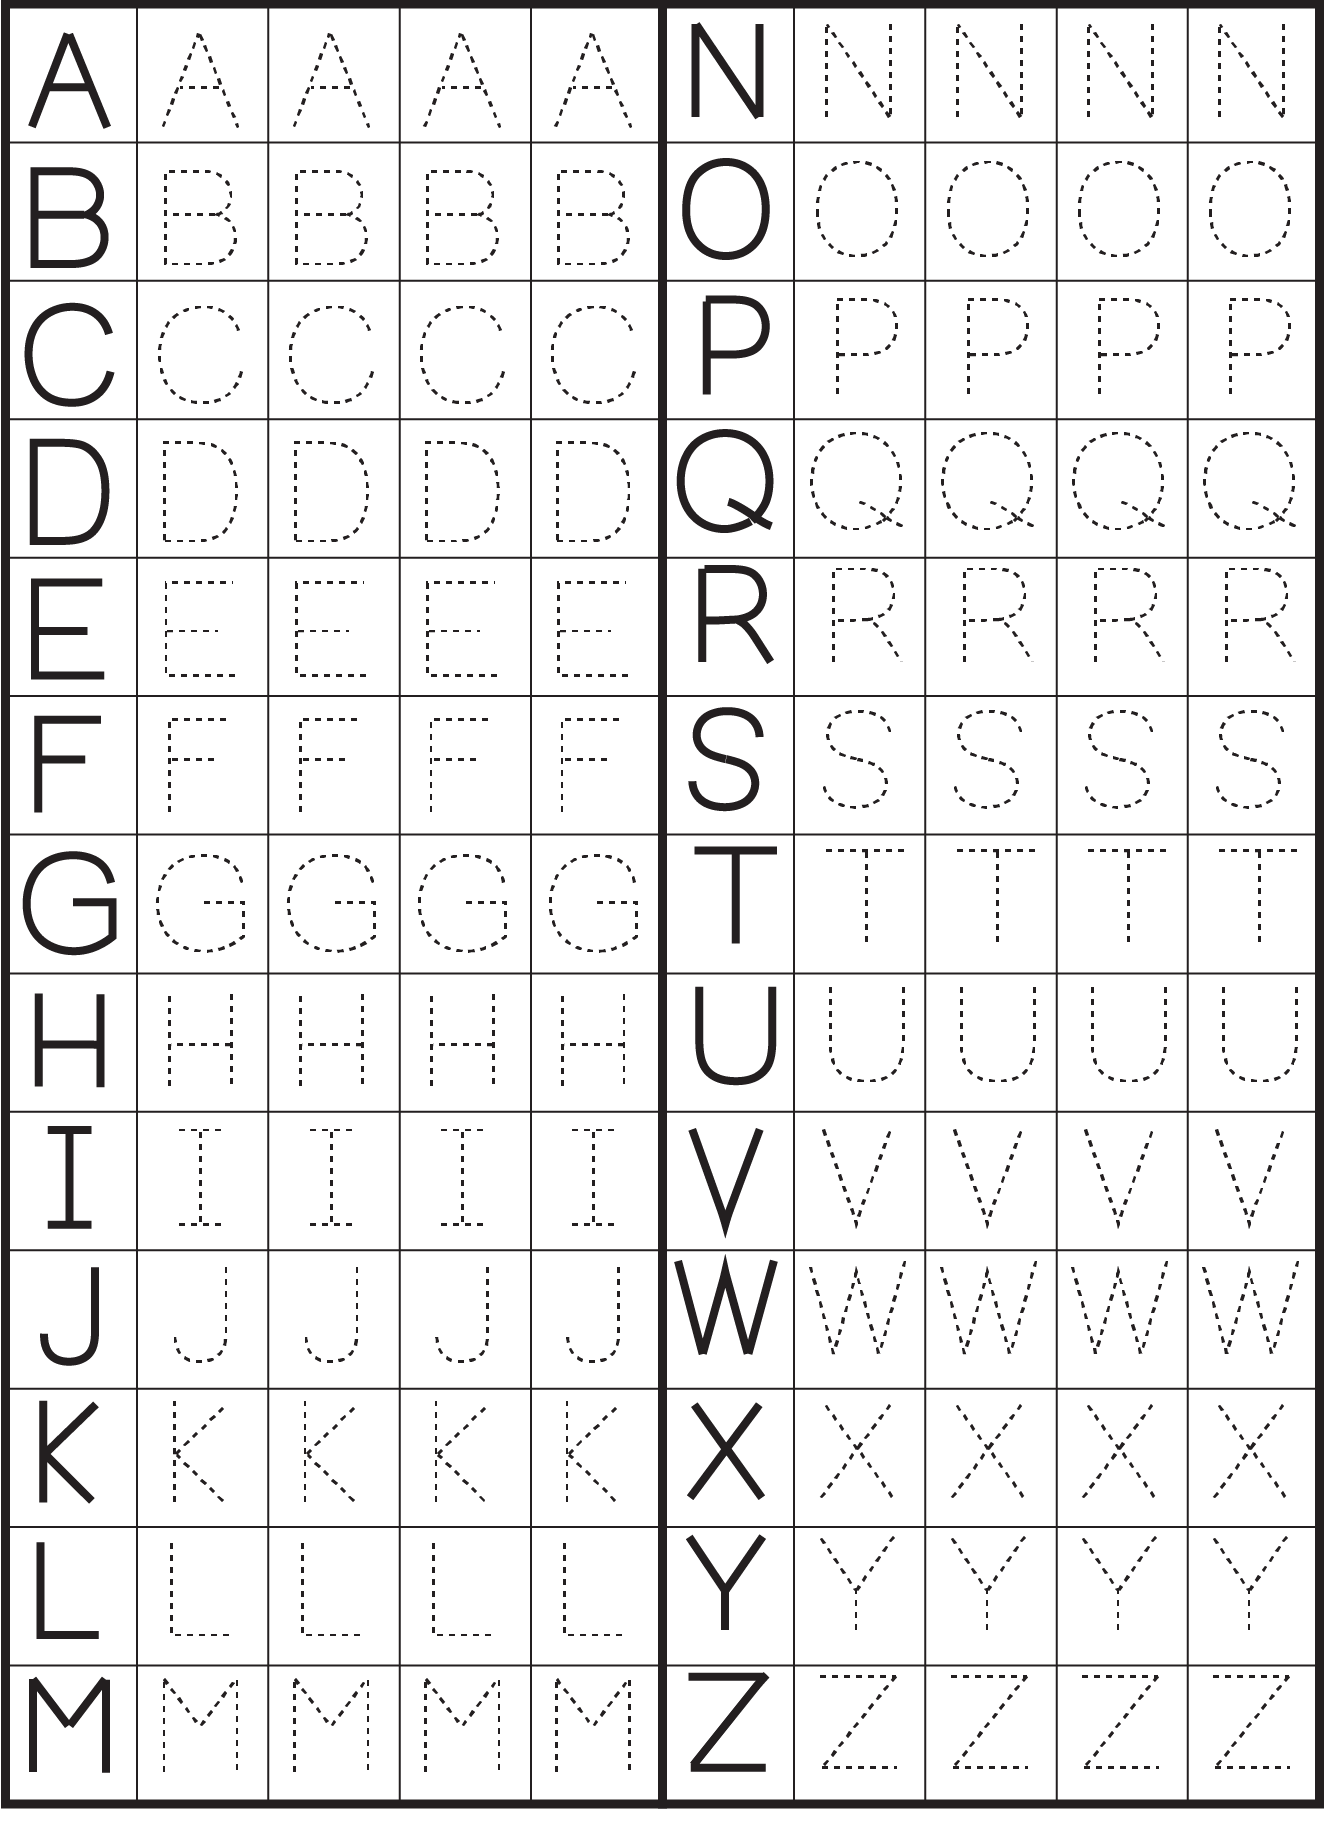 7-best-images-of-free-printable-tracing-letters-preschool-worksheets-free-printable-abc